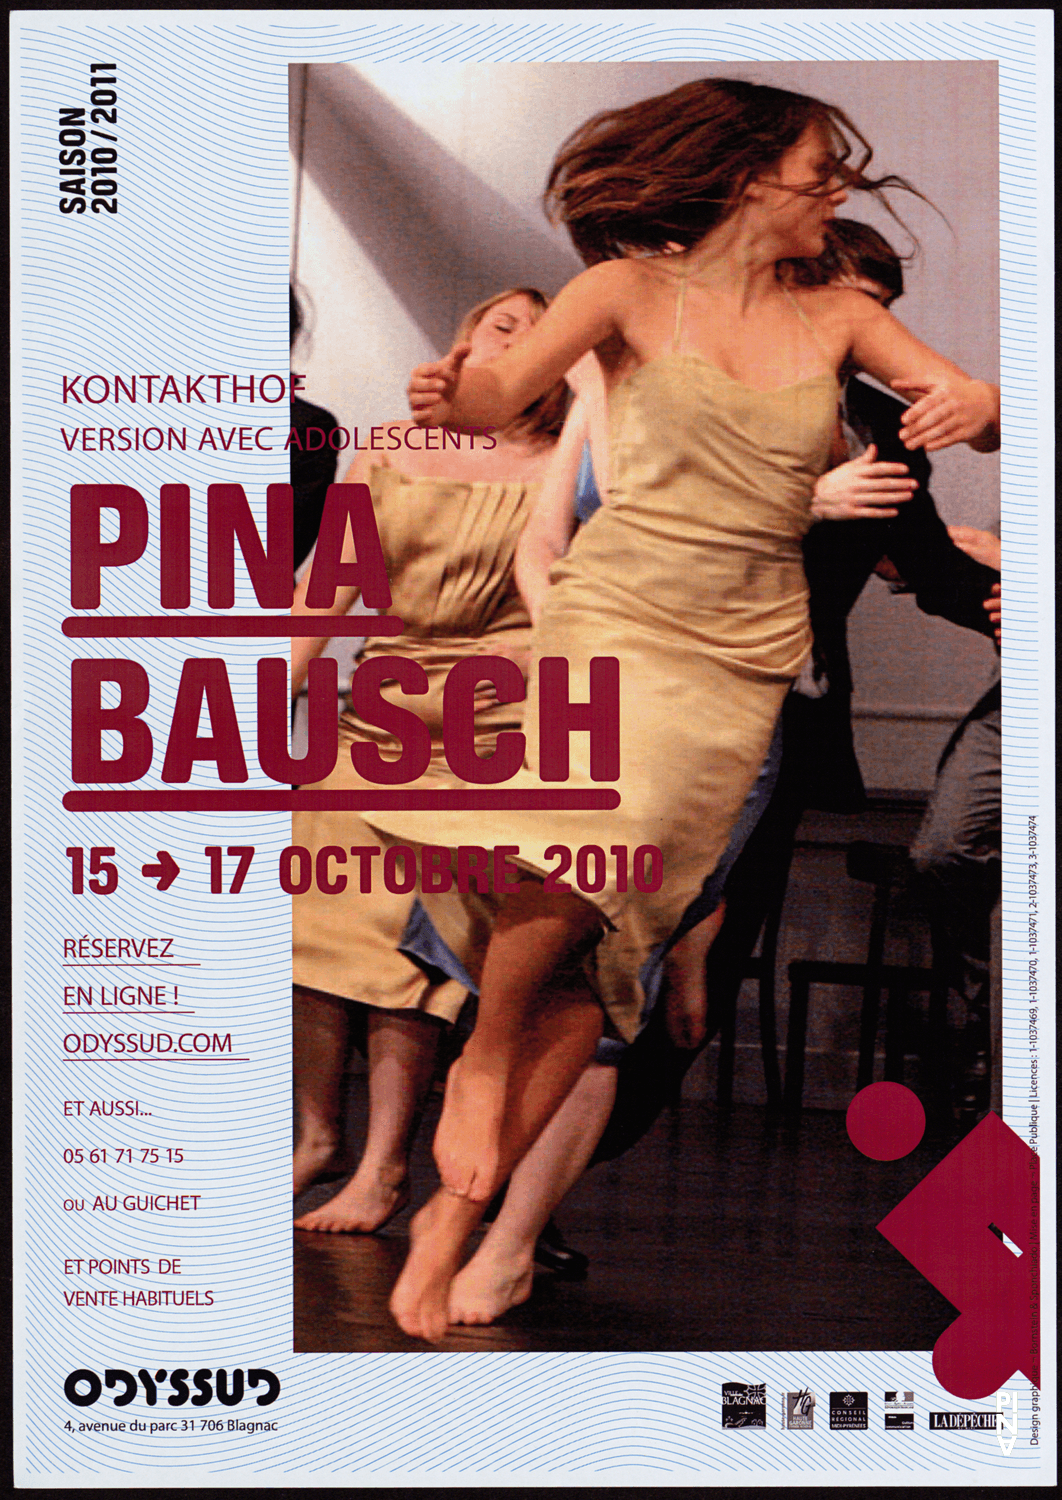 Poster for “Kontakthof. With Teenagers over 14” by Pina Bausch in Blagnac, 10/15/2010 – 10/17/2010